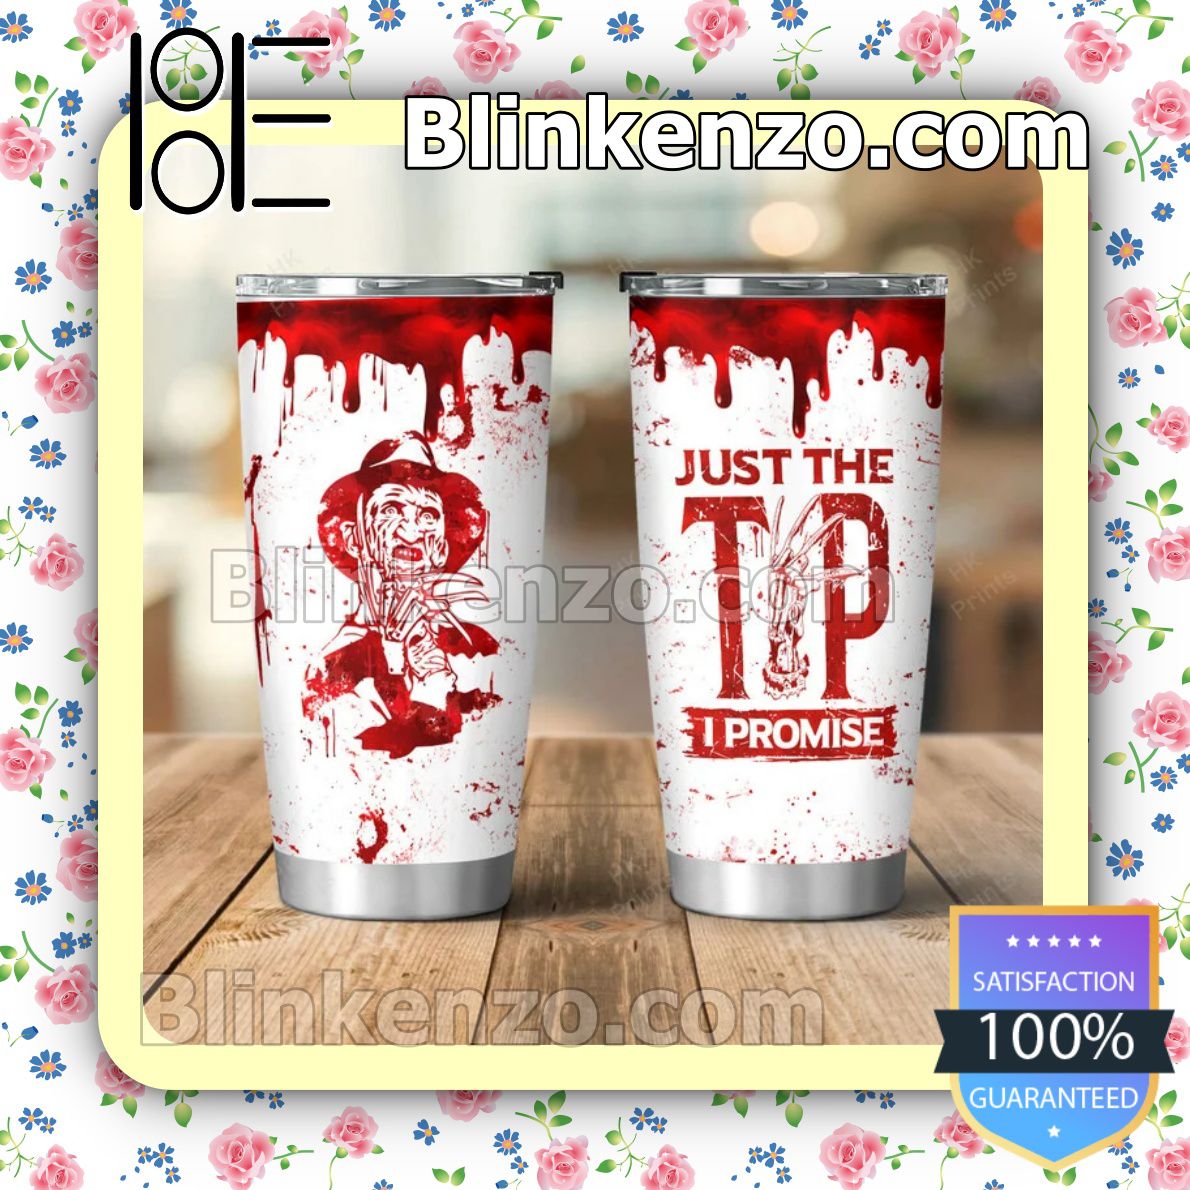 Top Rated Freddy Krueger Just The Tip I Promise Halloween Coffee Travel Mug Tumbler